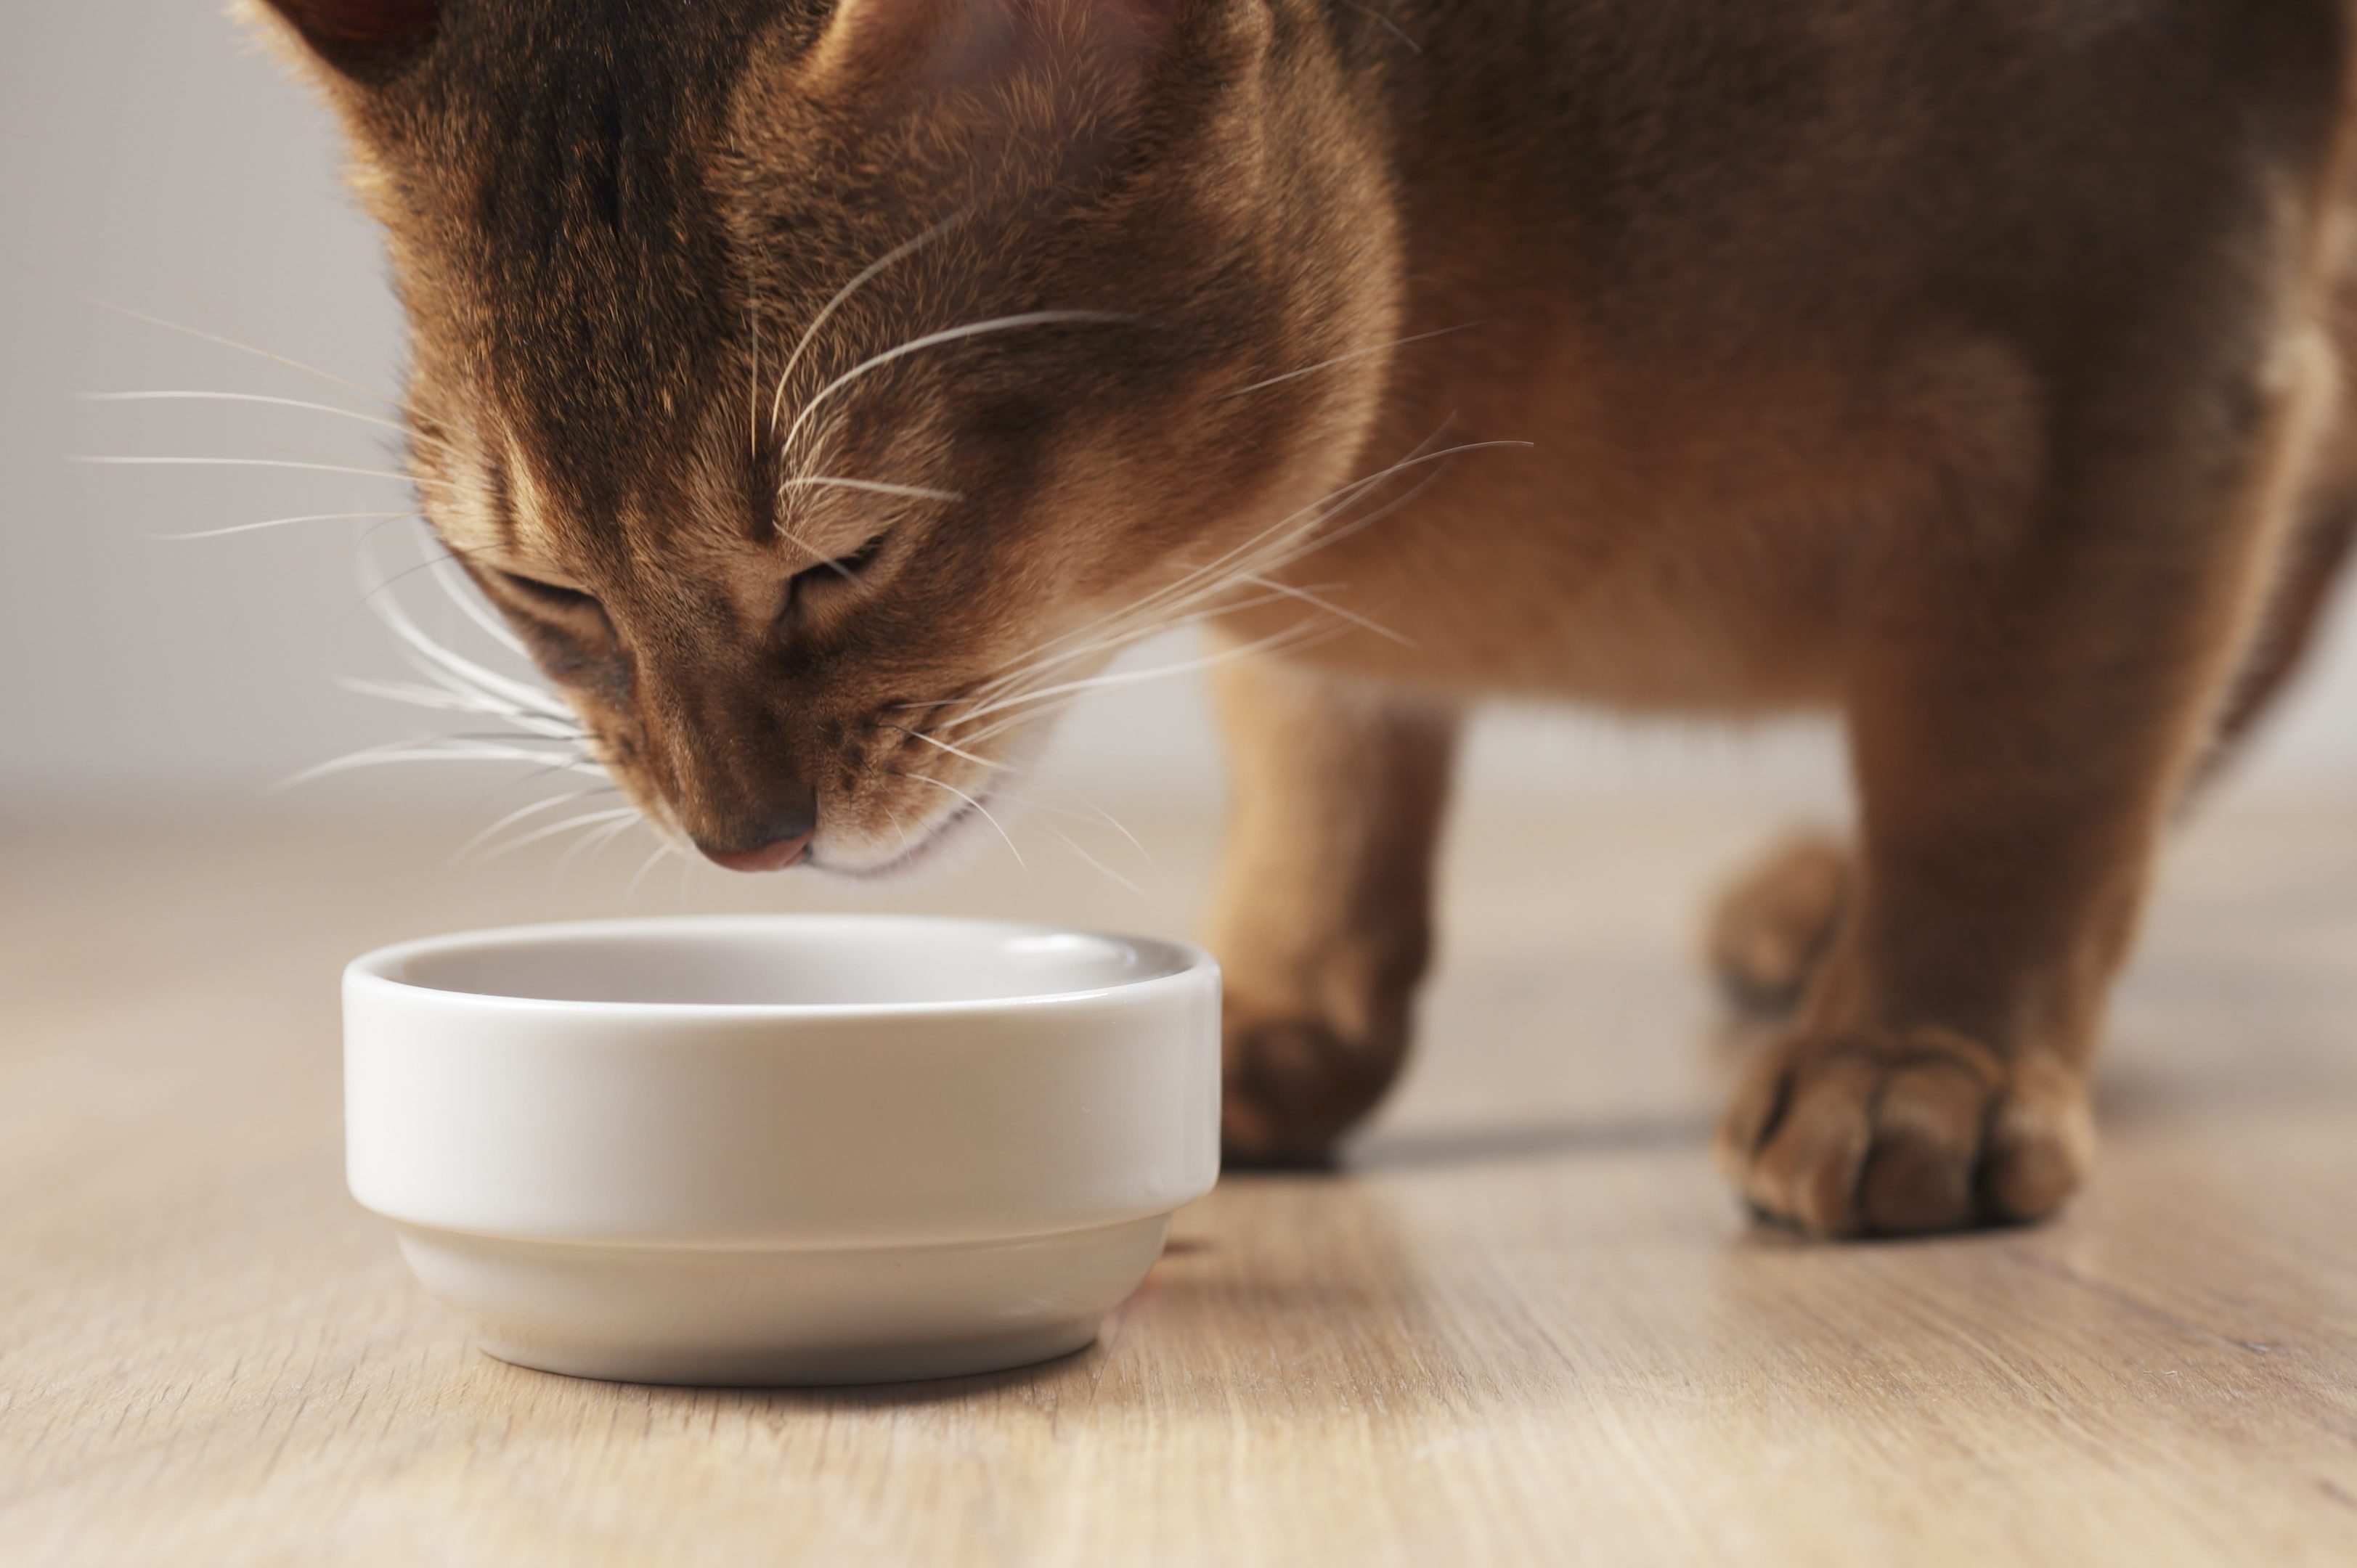 abyssinian cat eating meat from bowl on table, 4k photo